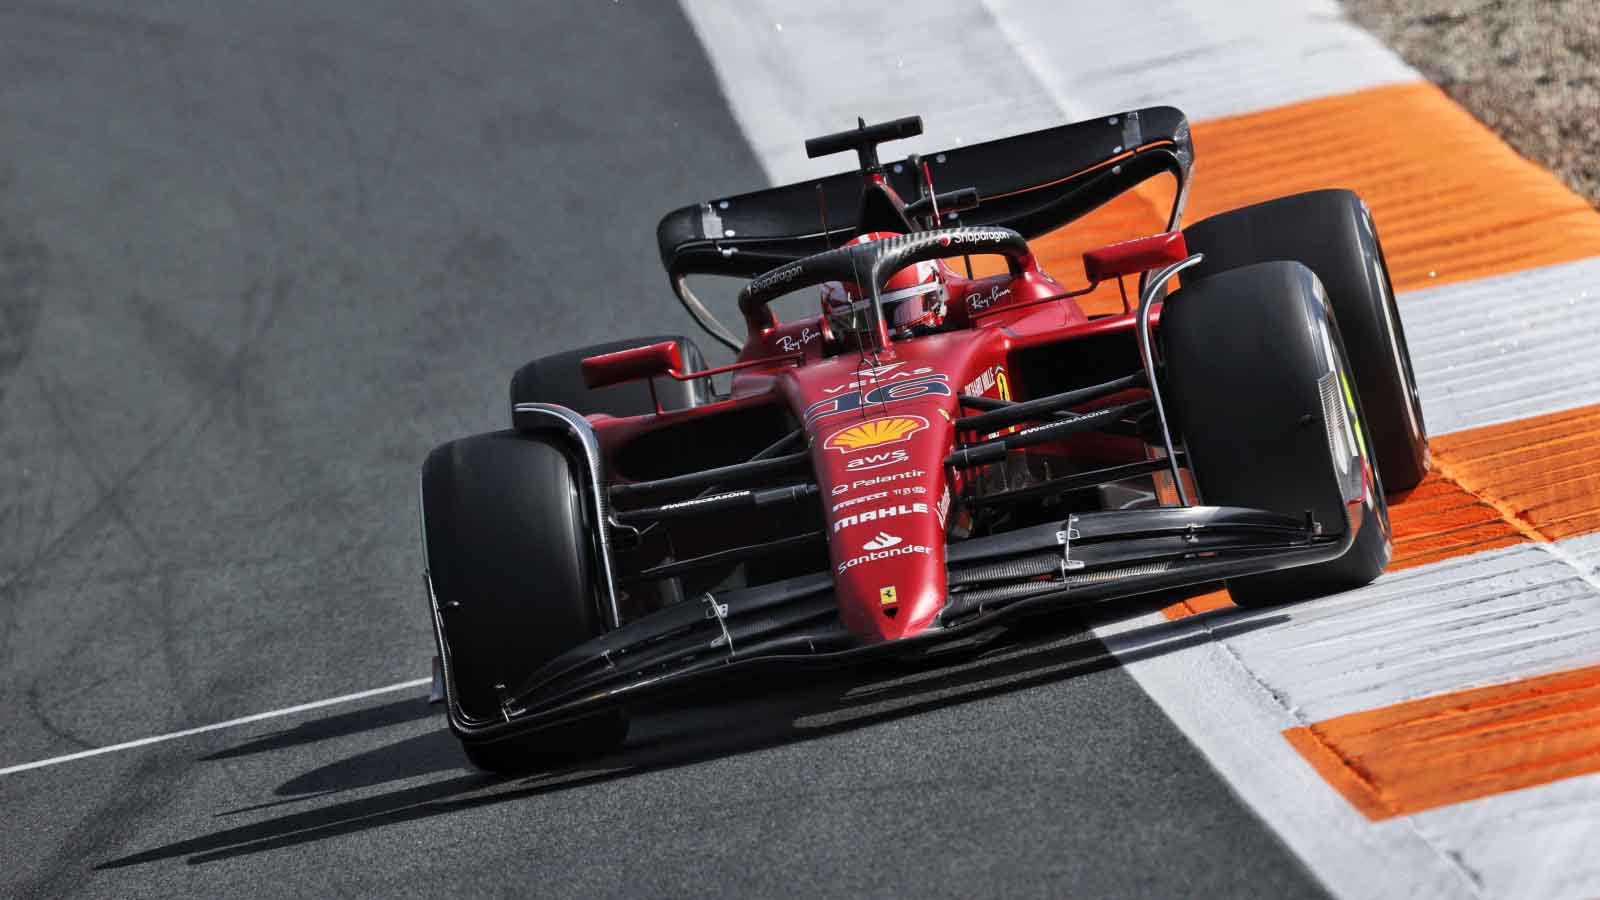 Charles Leclerc in FP2 at the Dutch GP. Zandvoort September 2022.